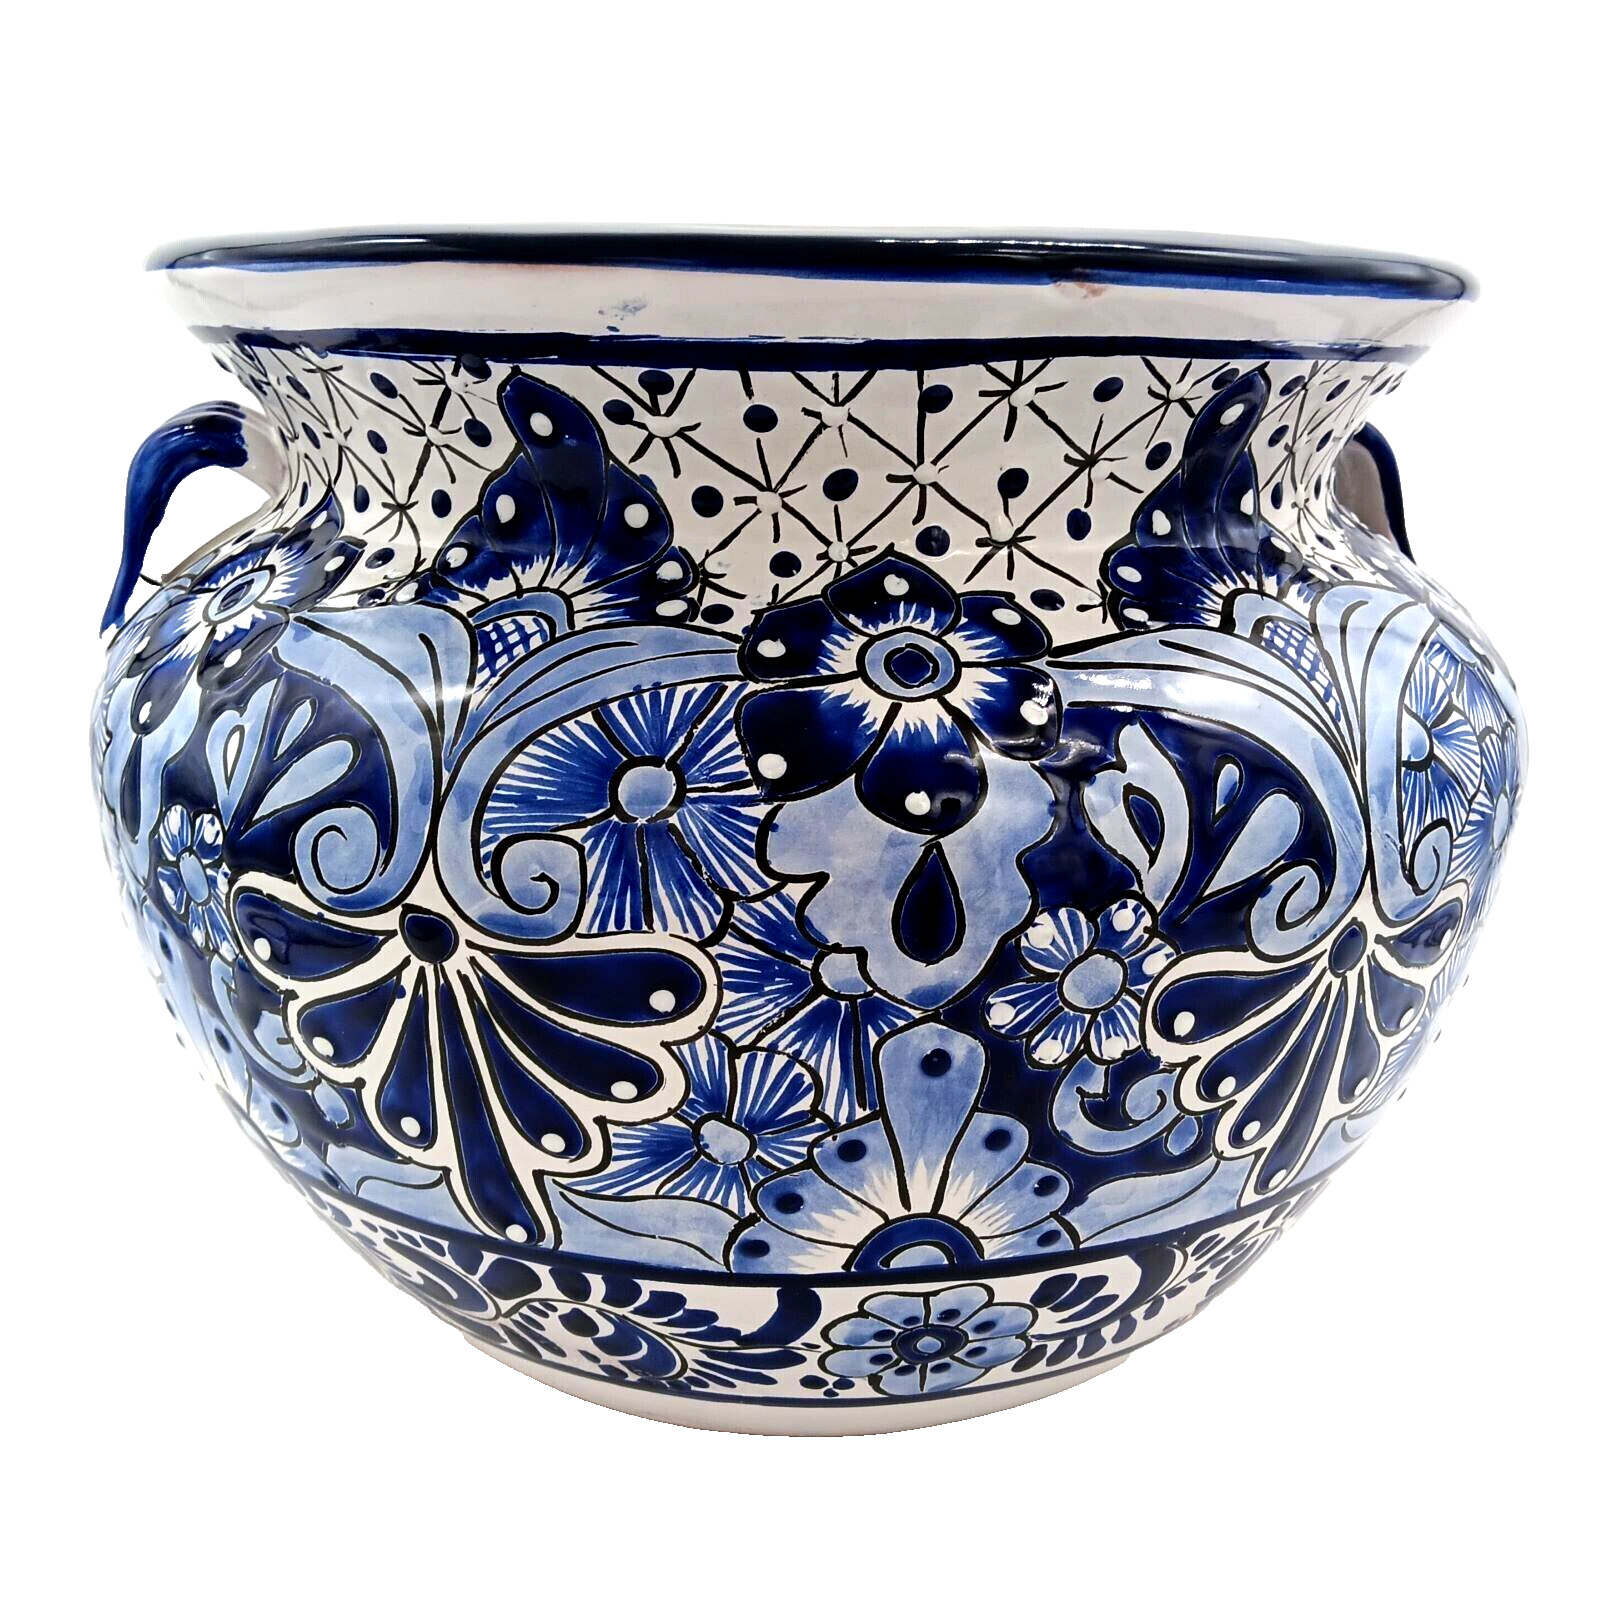 Talavera Pottery Planter Mexican Ceramic Flower Pot X Large Blue White 18in